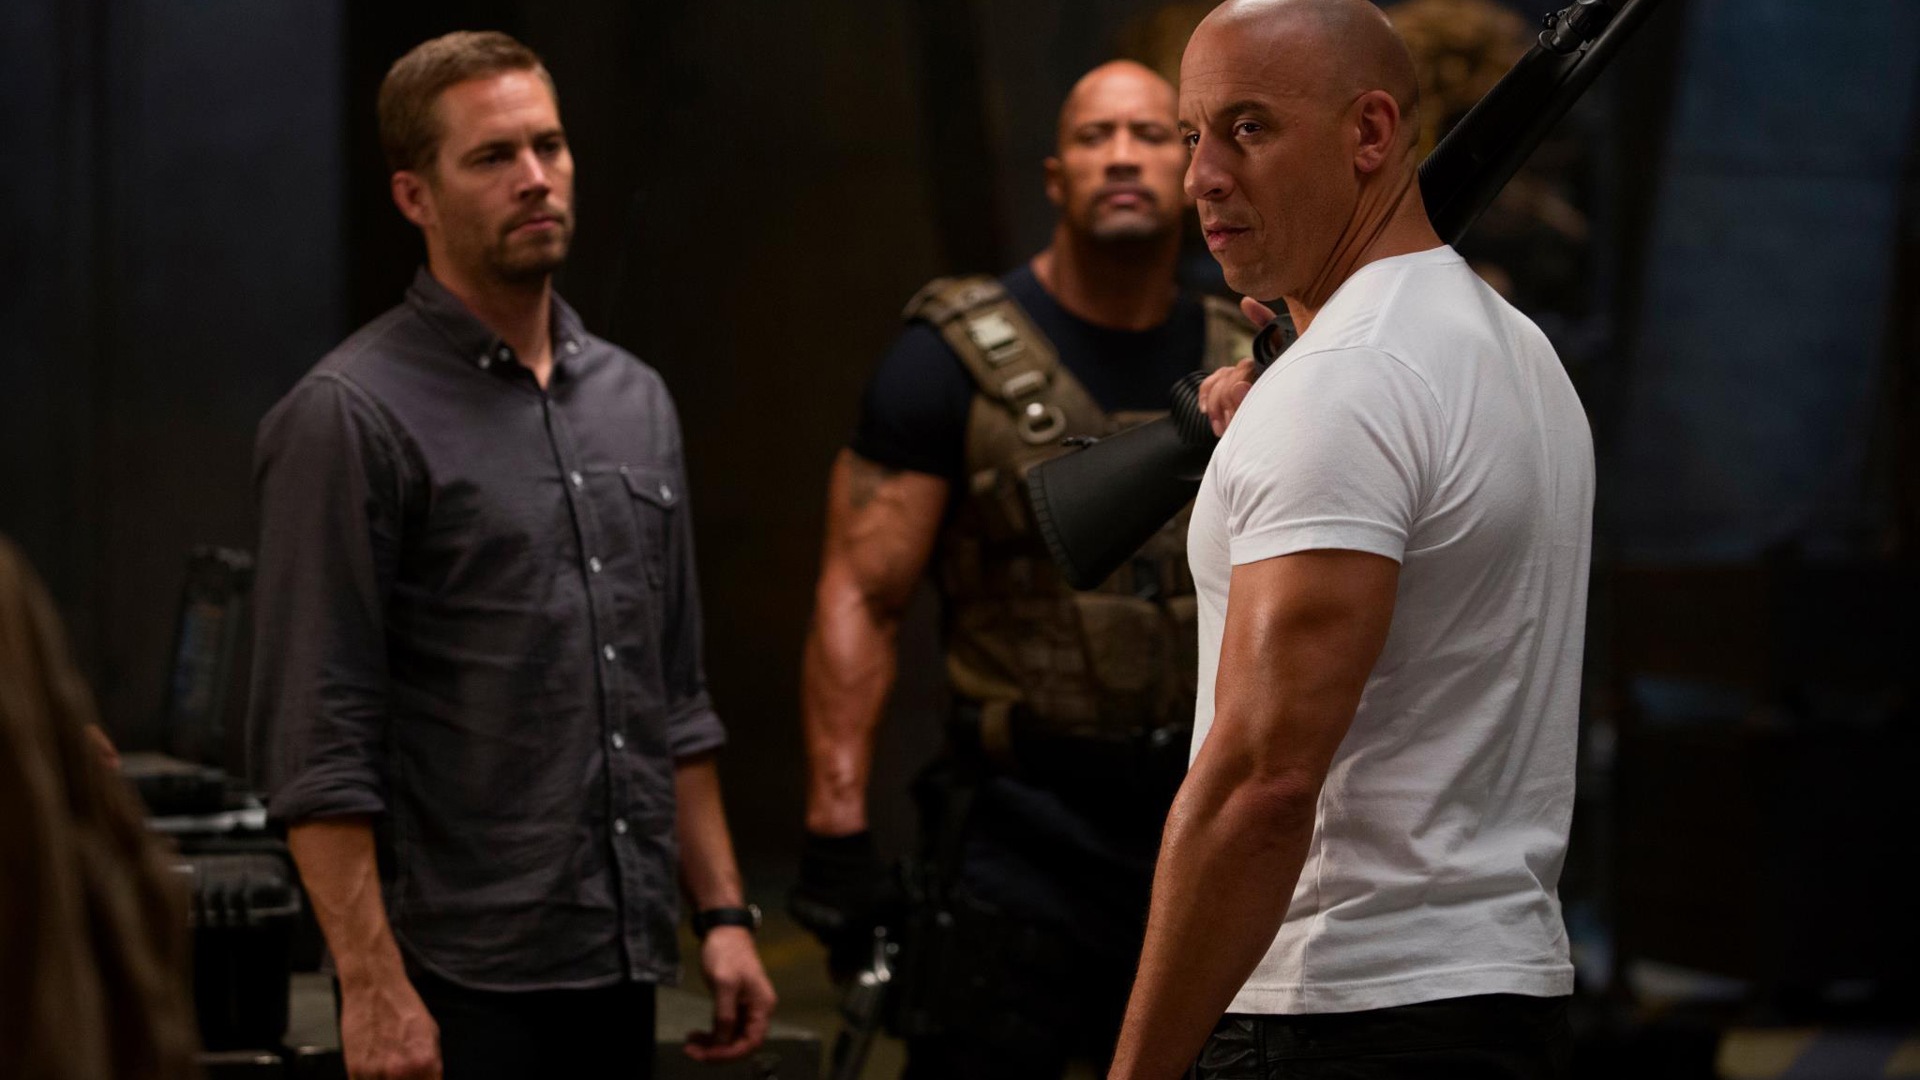 Fast And Furious 6 HD movie wallpapers #5 - 1920x1080